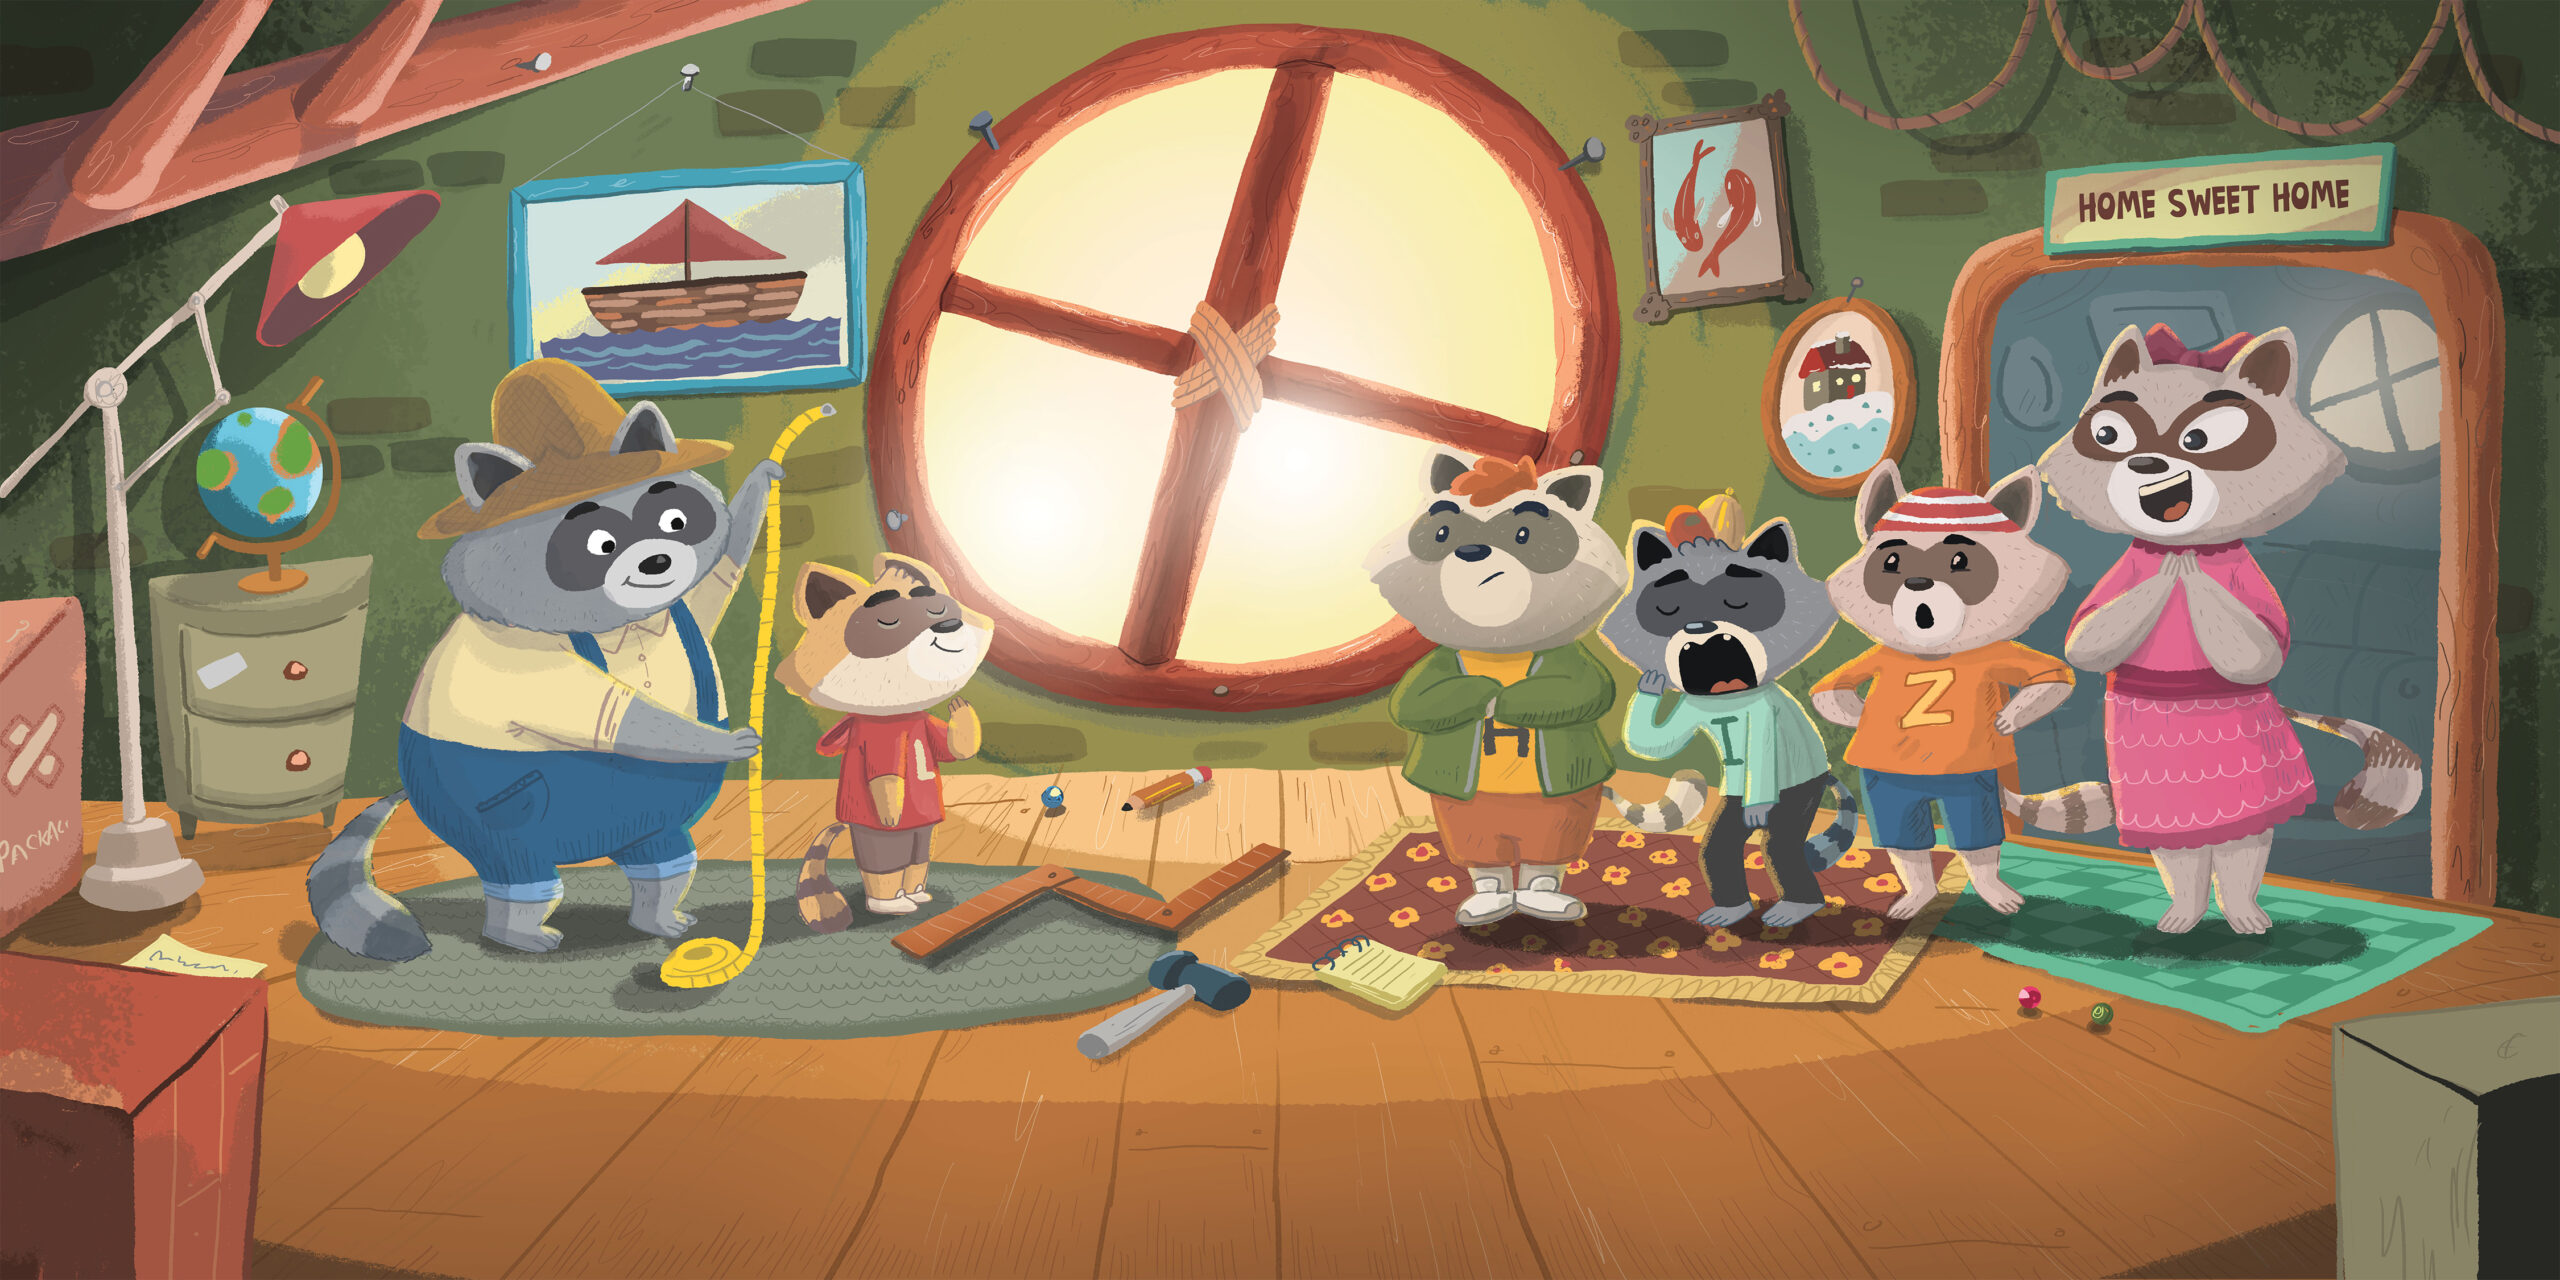 Creating a world where humans and raccoons live in harmony – “The Family Business” Children’s Book